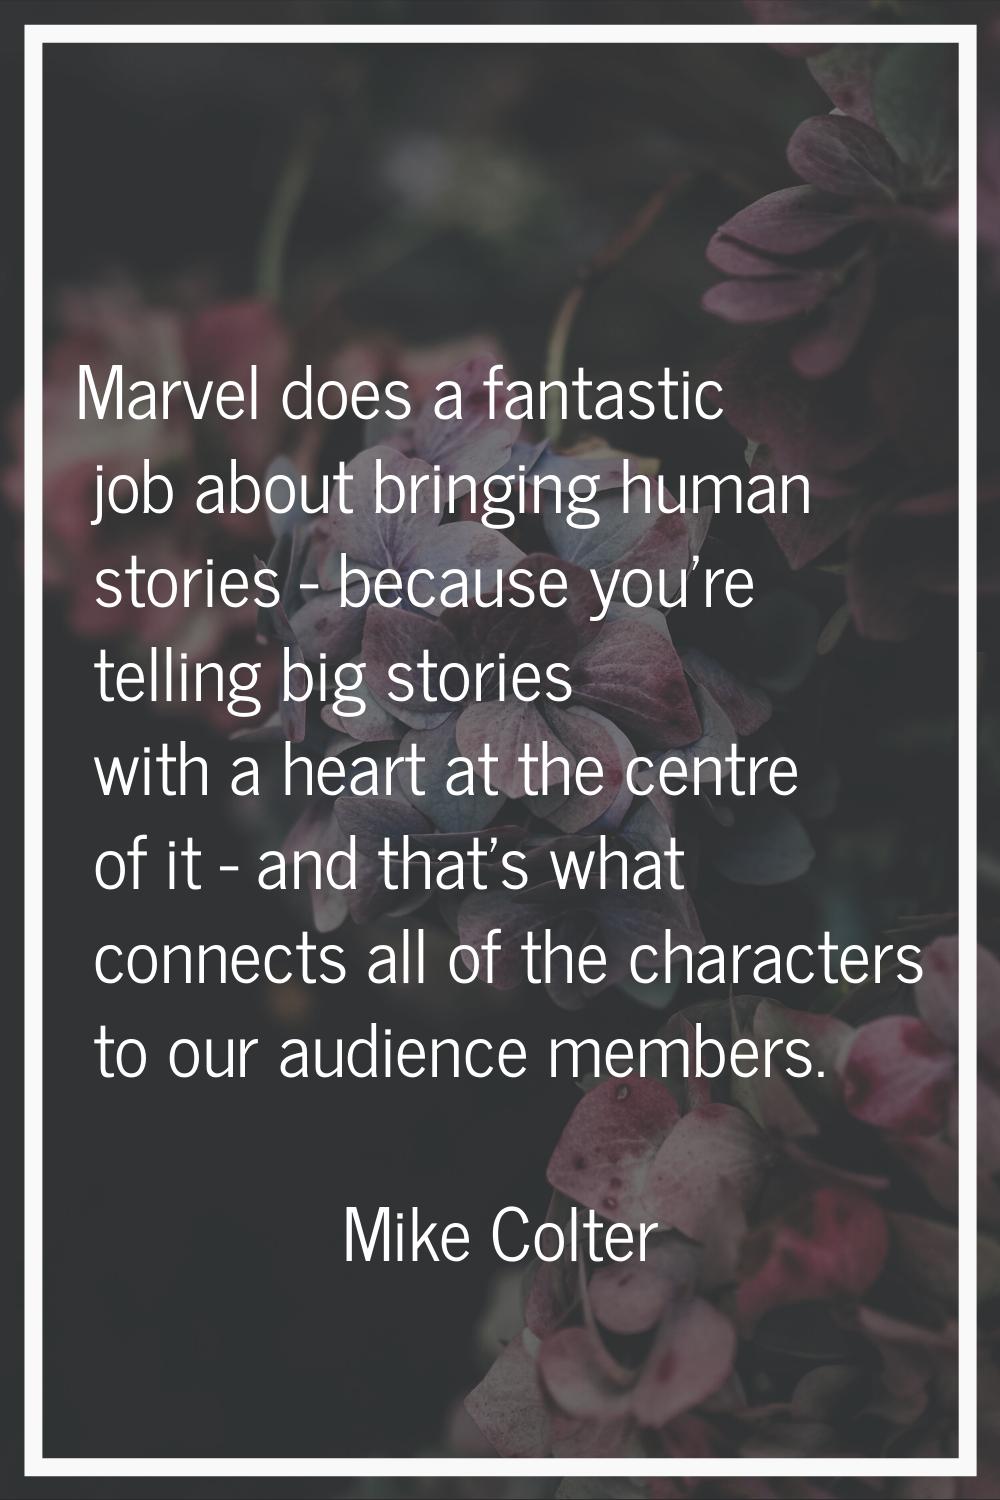 Marvel does a fantastic job about bringing human stories - because you're telling big stories with 